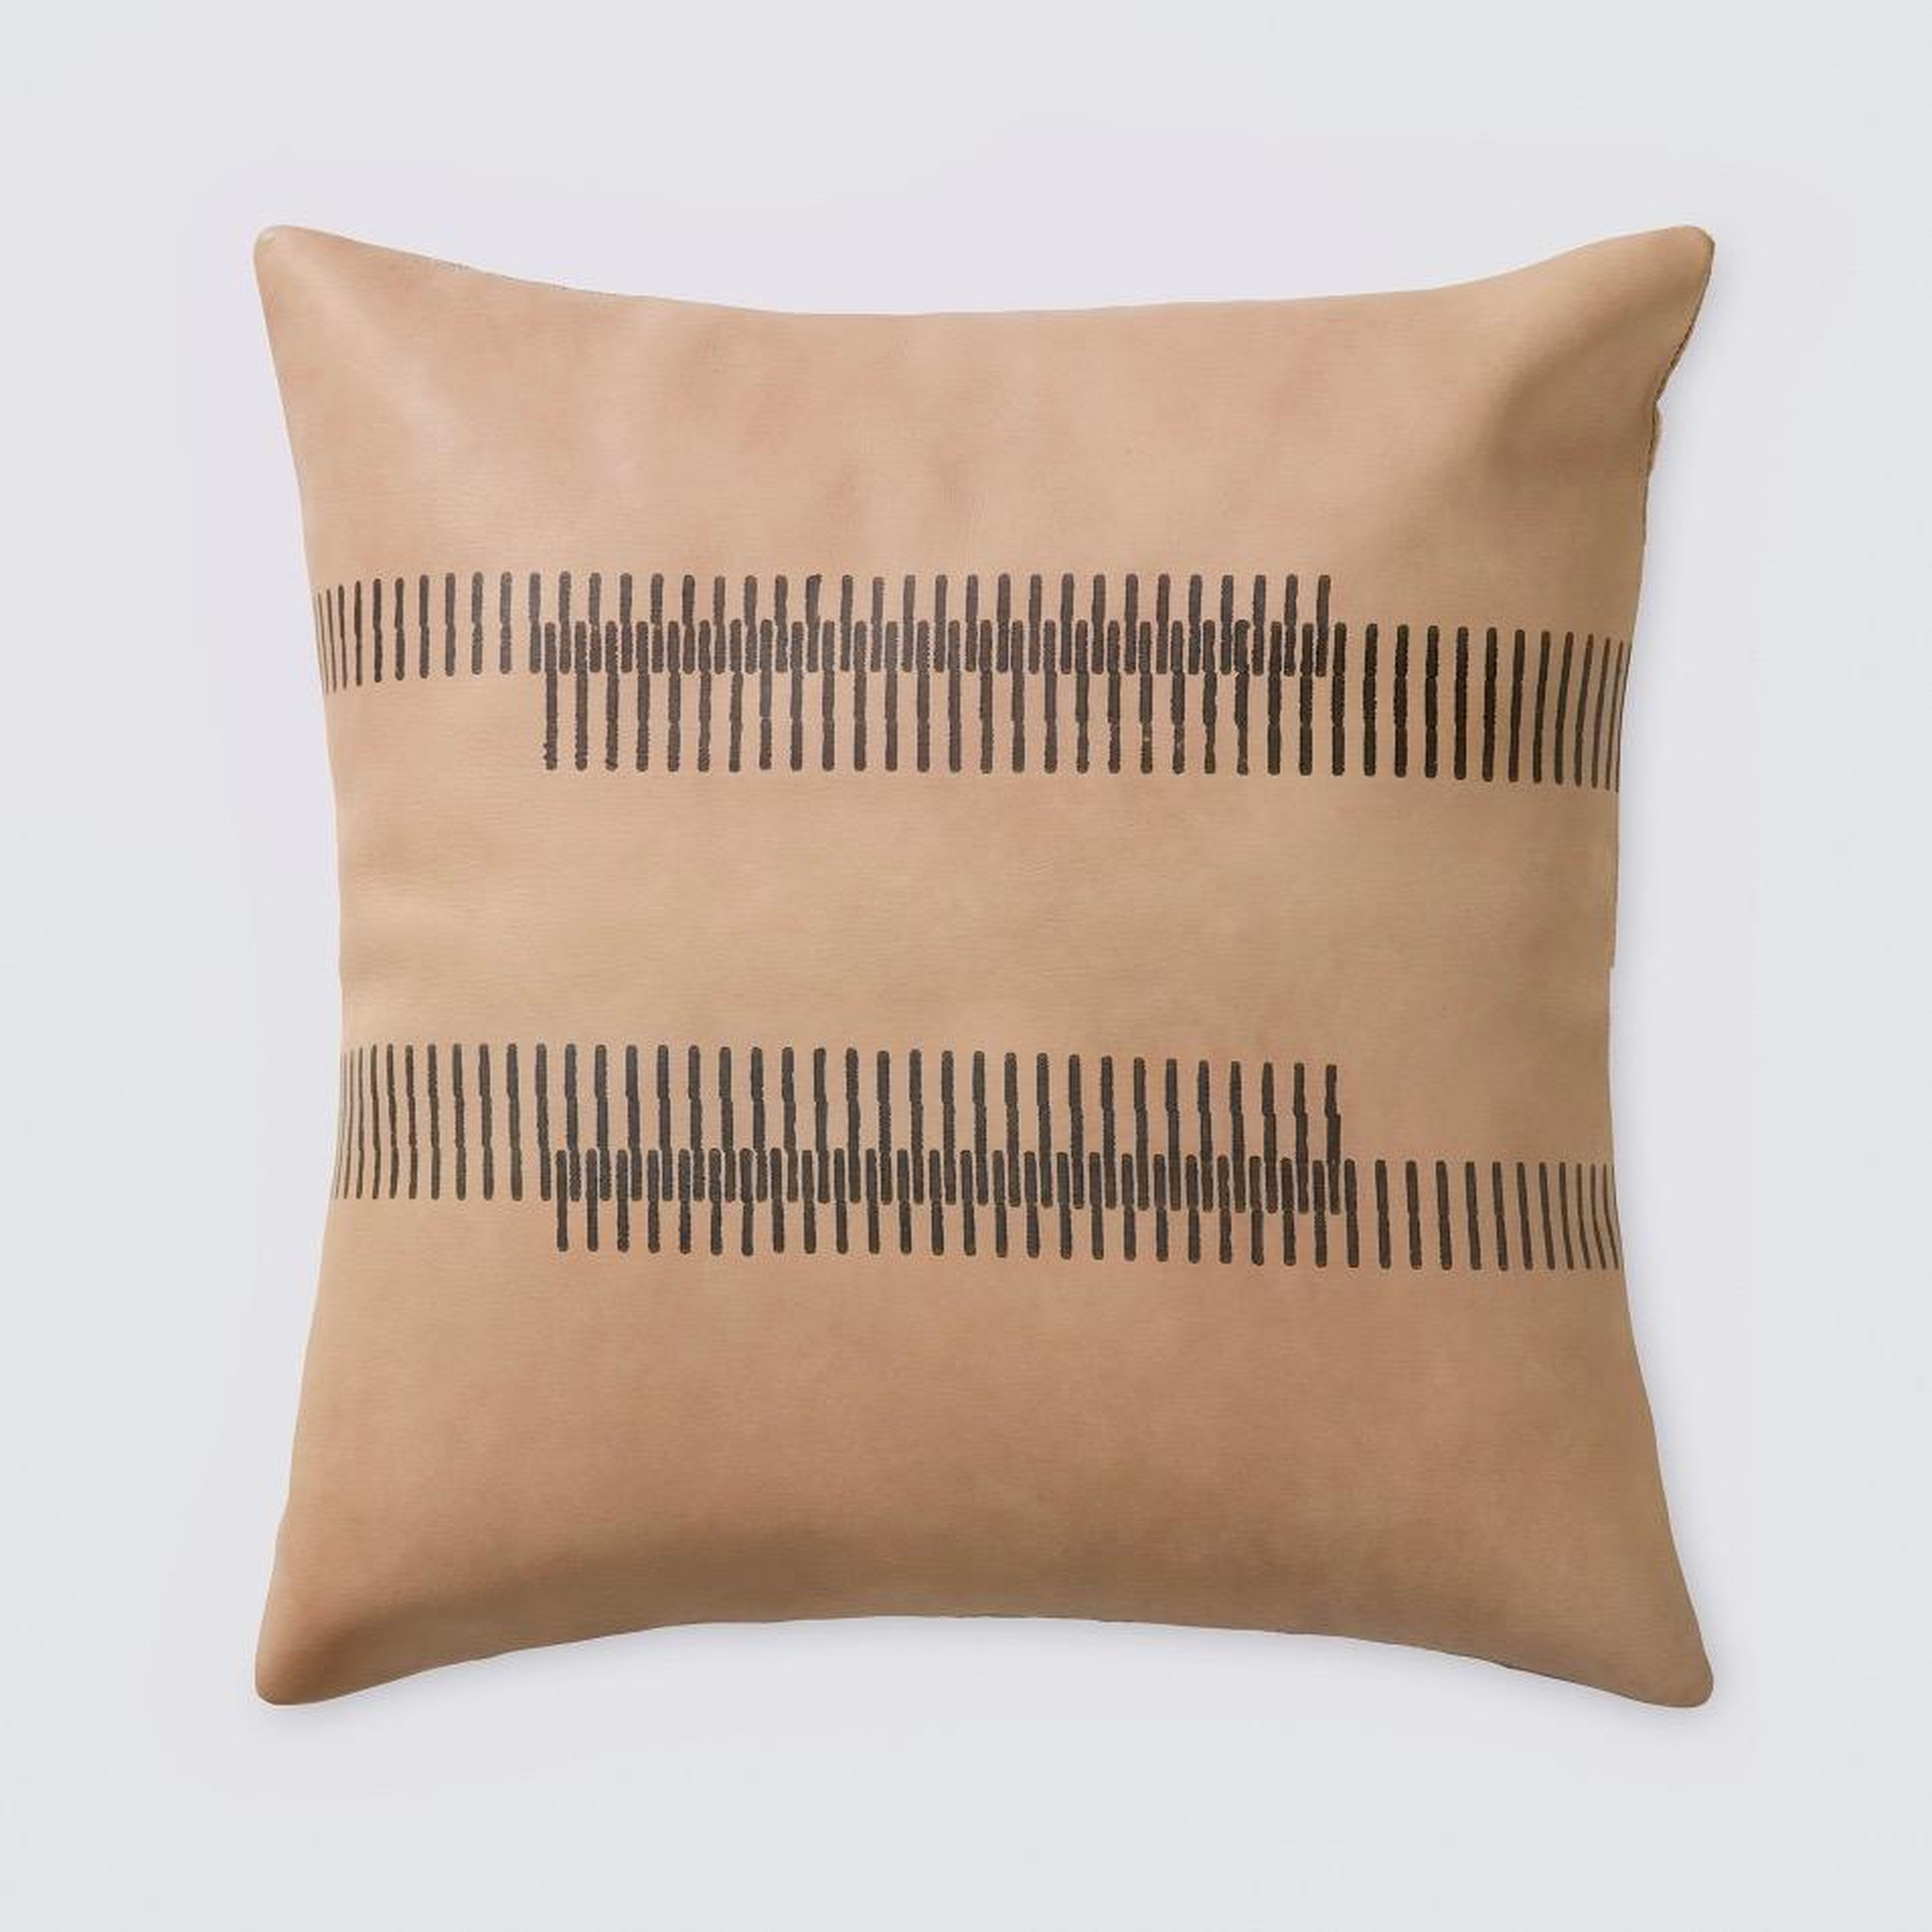 Amer Leather Pillow By The Citizenry - The Citizenry